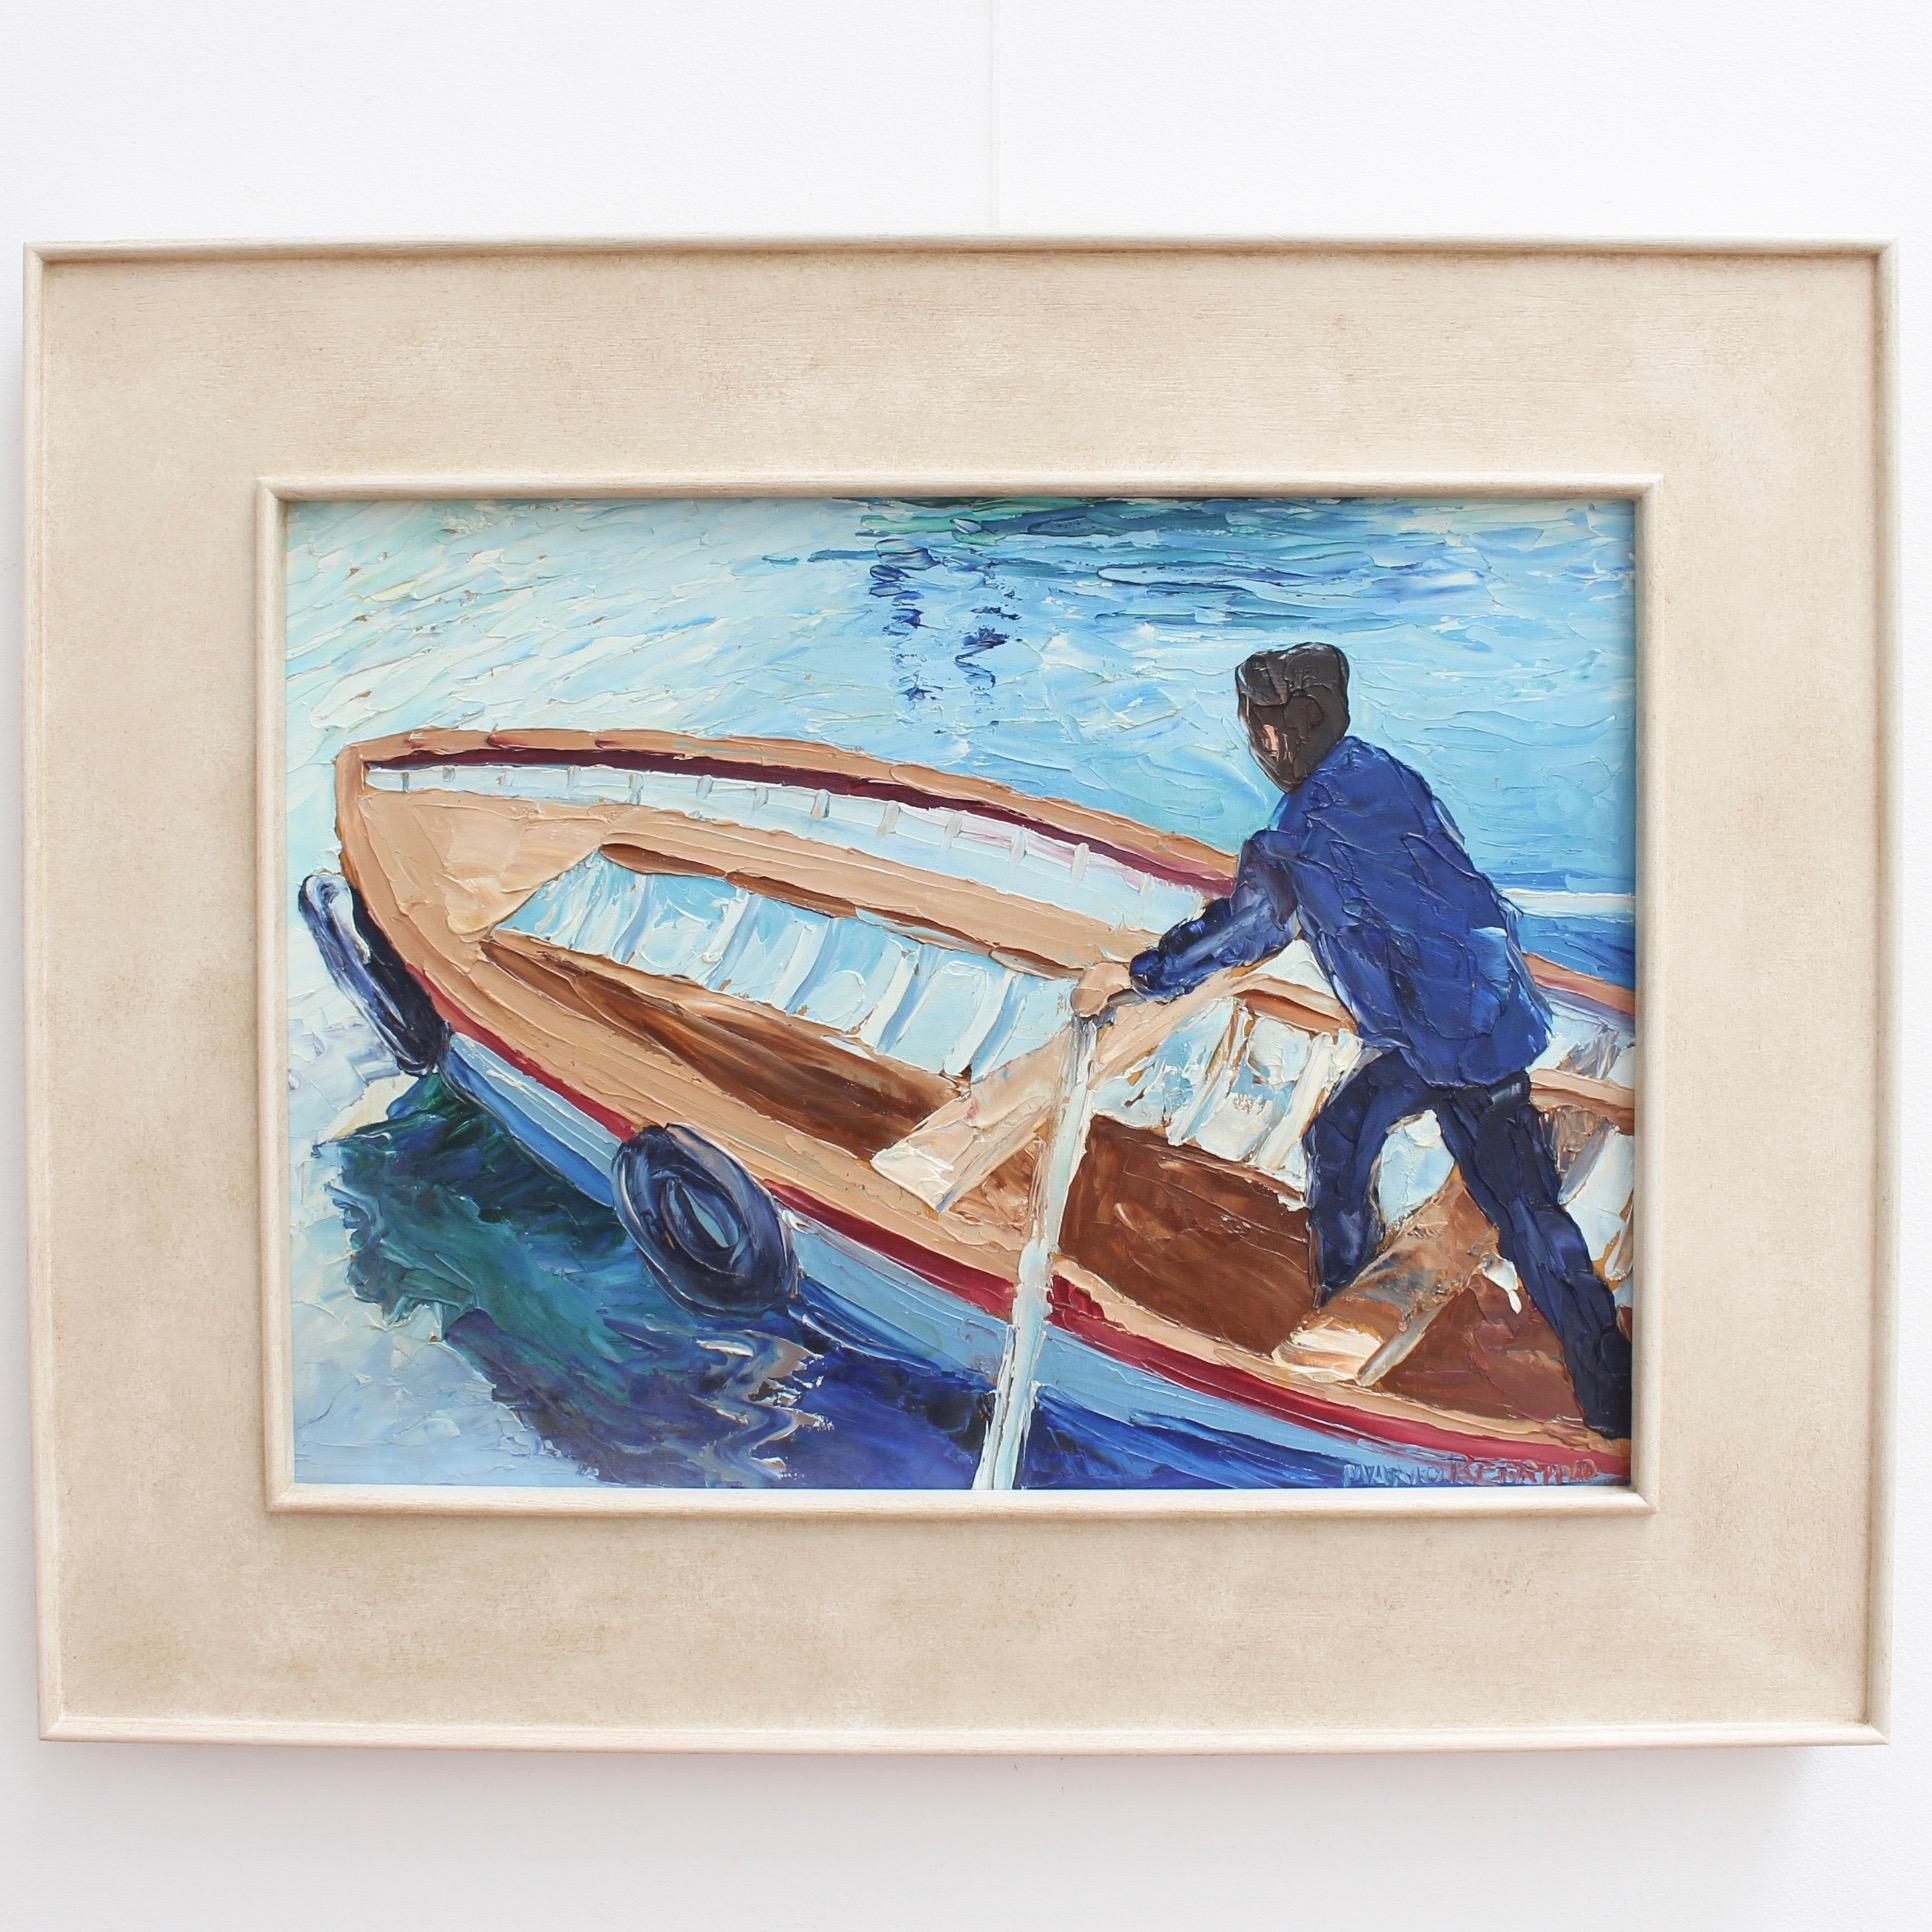 The Man in the Boat - Painting by Mario Berrino